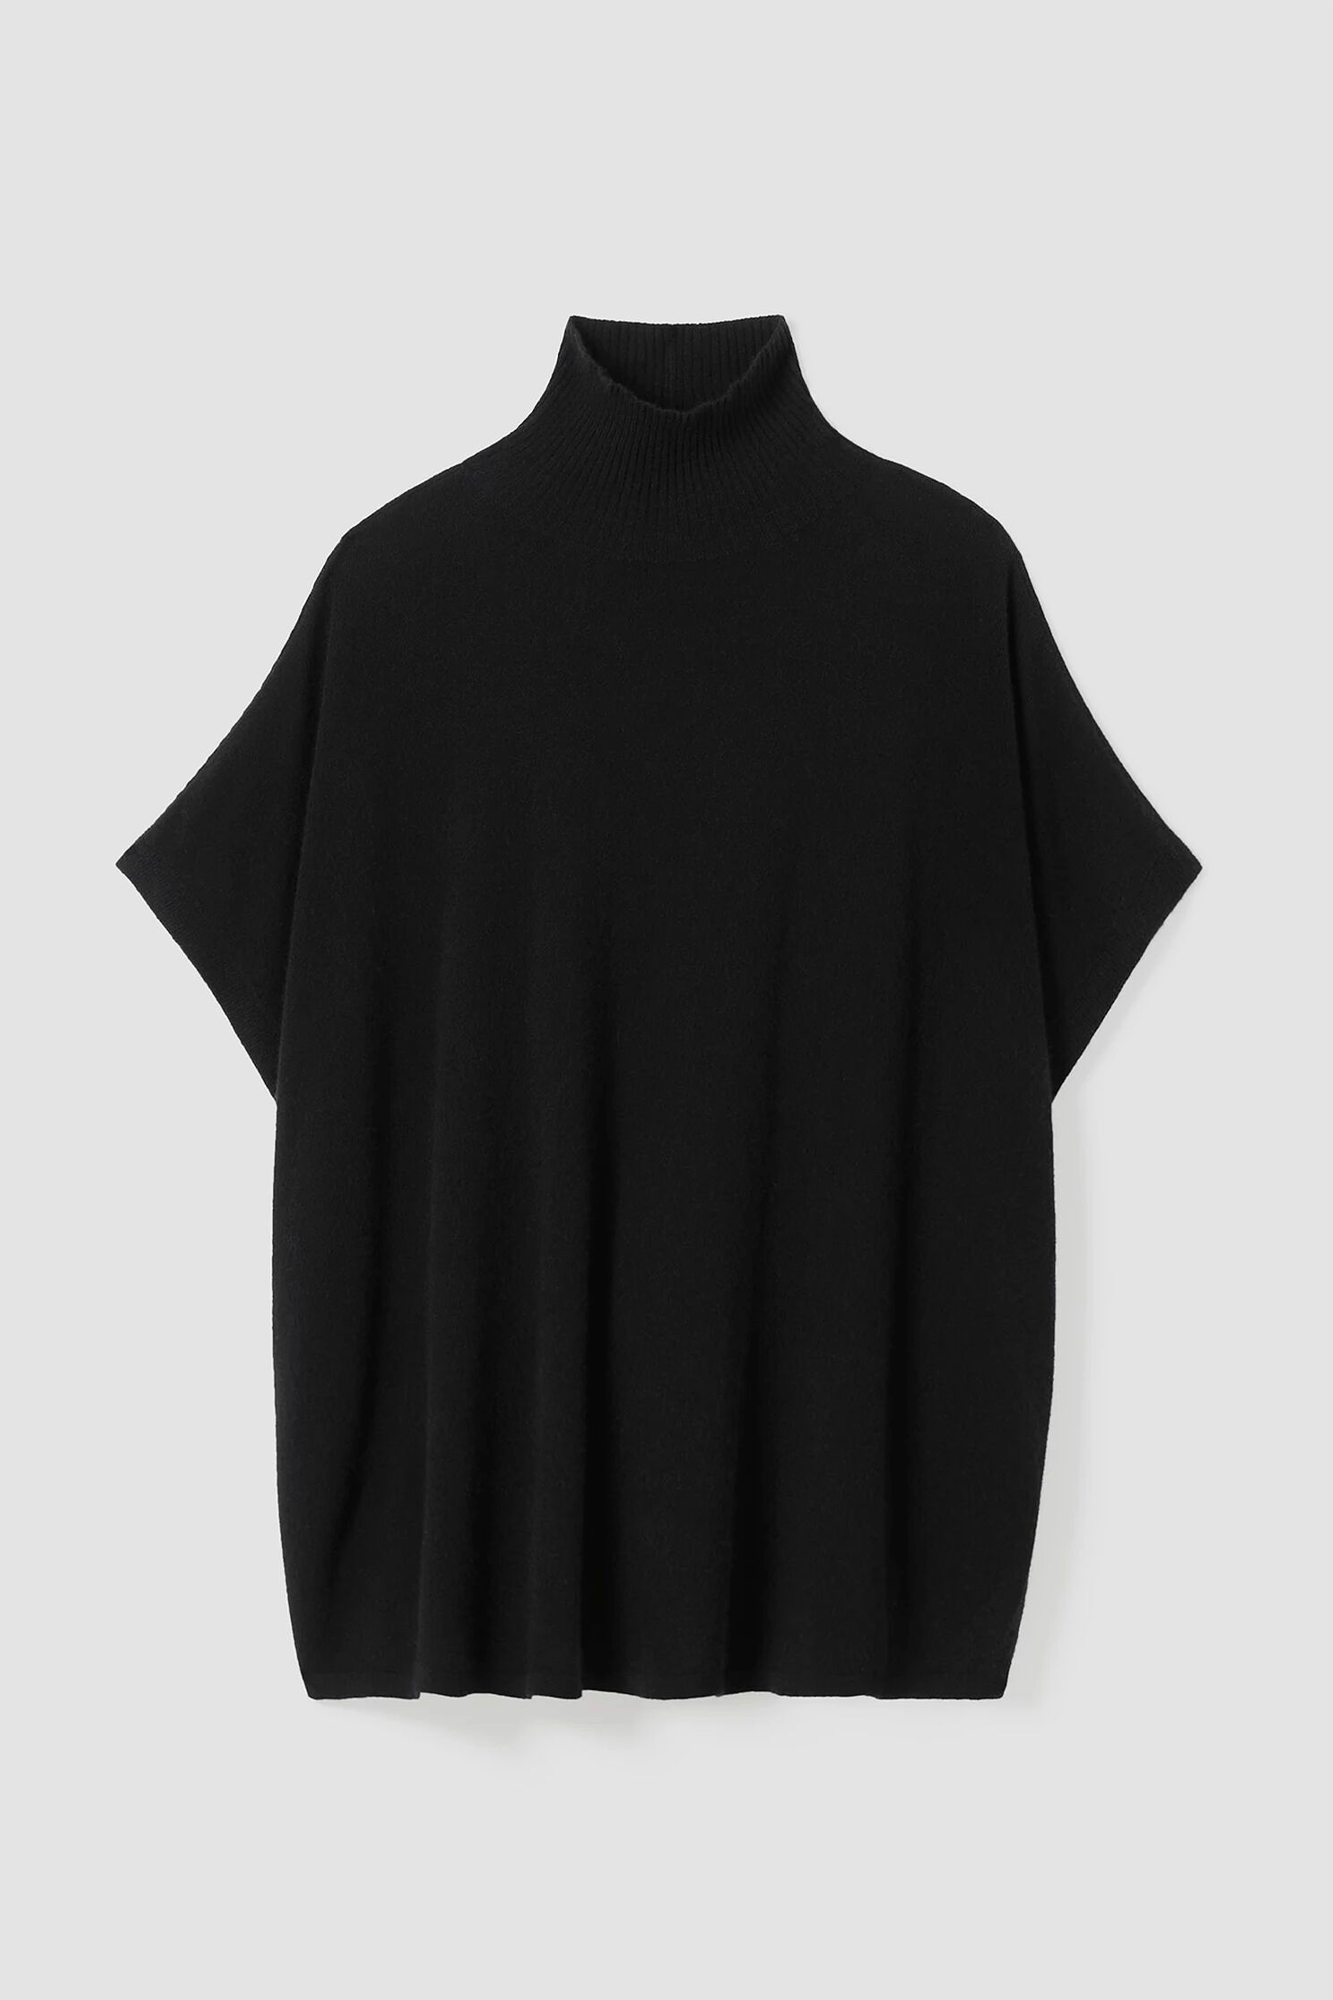 Stay cozy in the luxurious Italian cashmere Poncho from Eileen Fisher. Its turtleneck and streamlined design give you the best of both worlds without compromising on style. Wrap yourself in its plush and drapey fabric and stay warm all day.